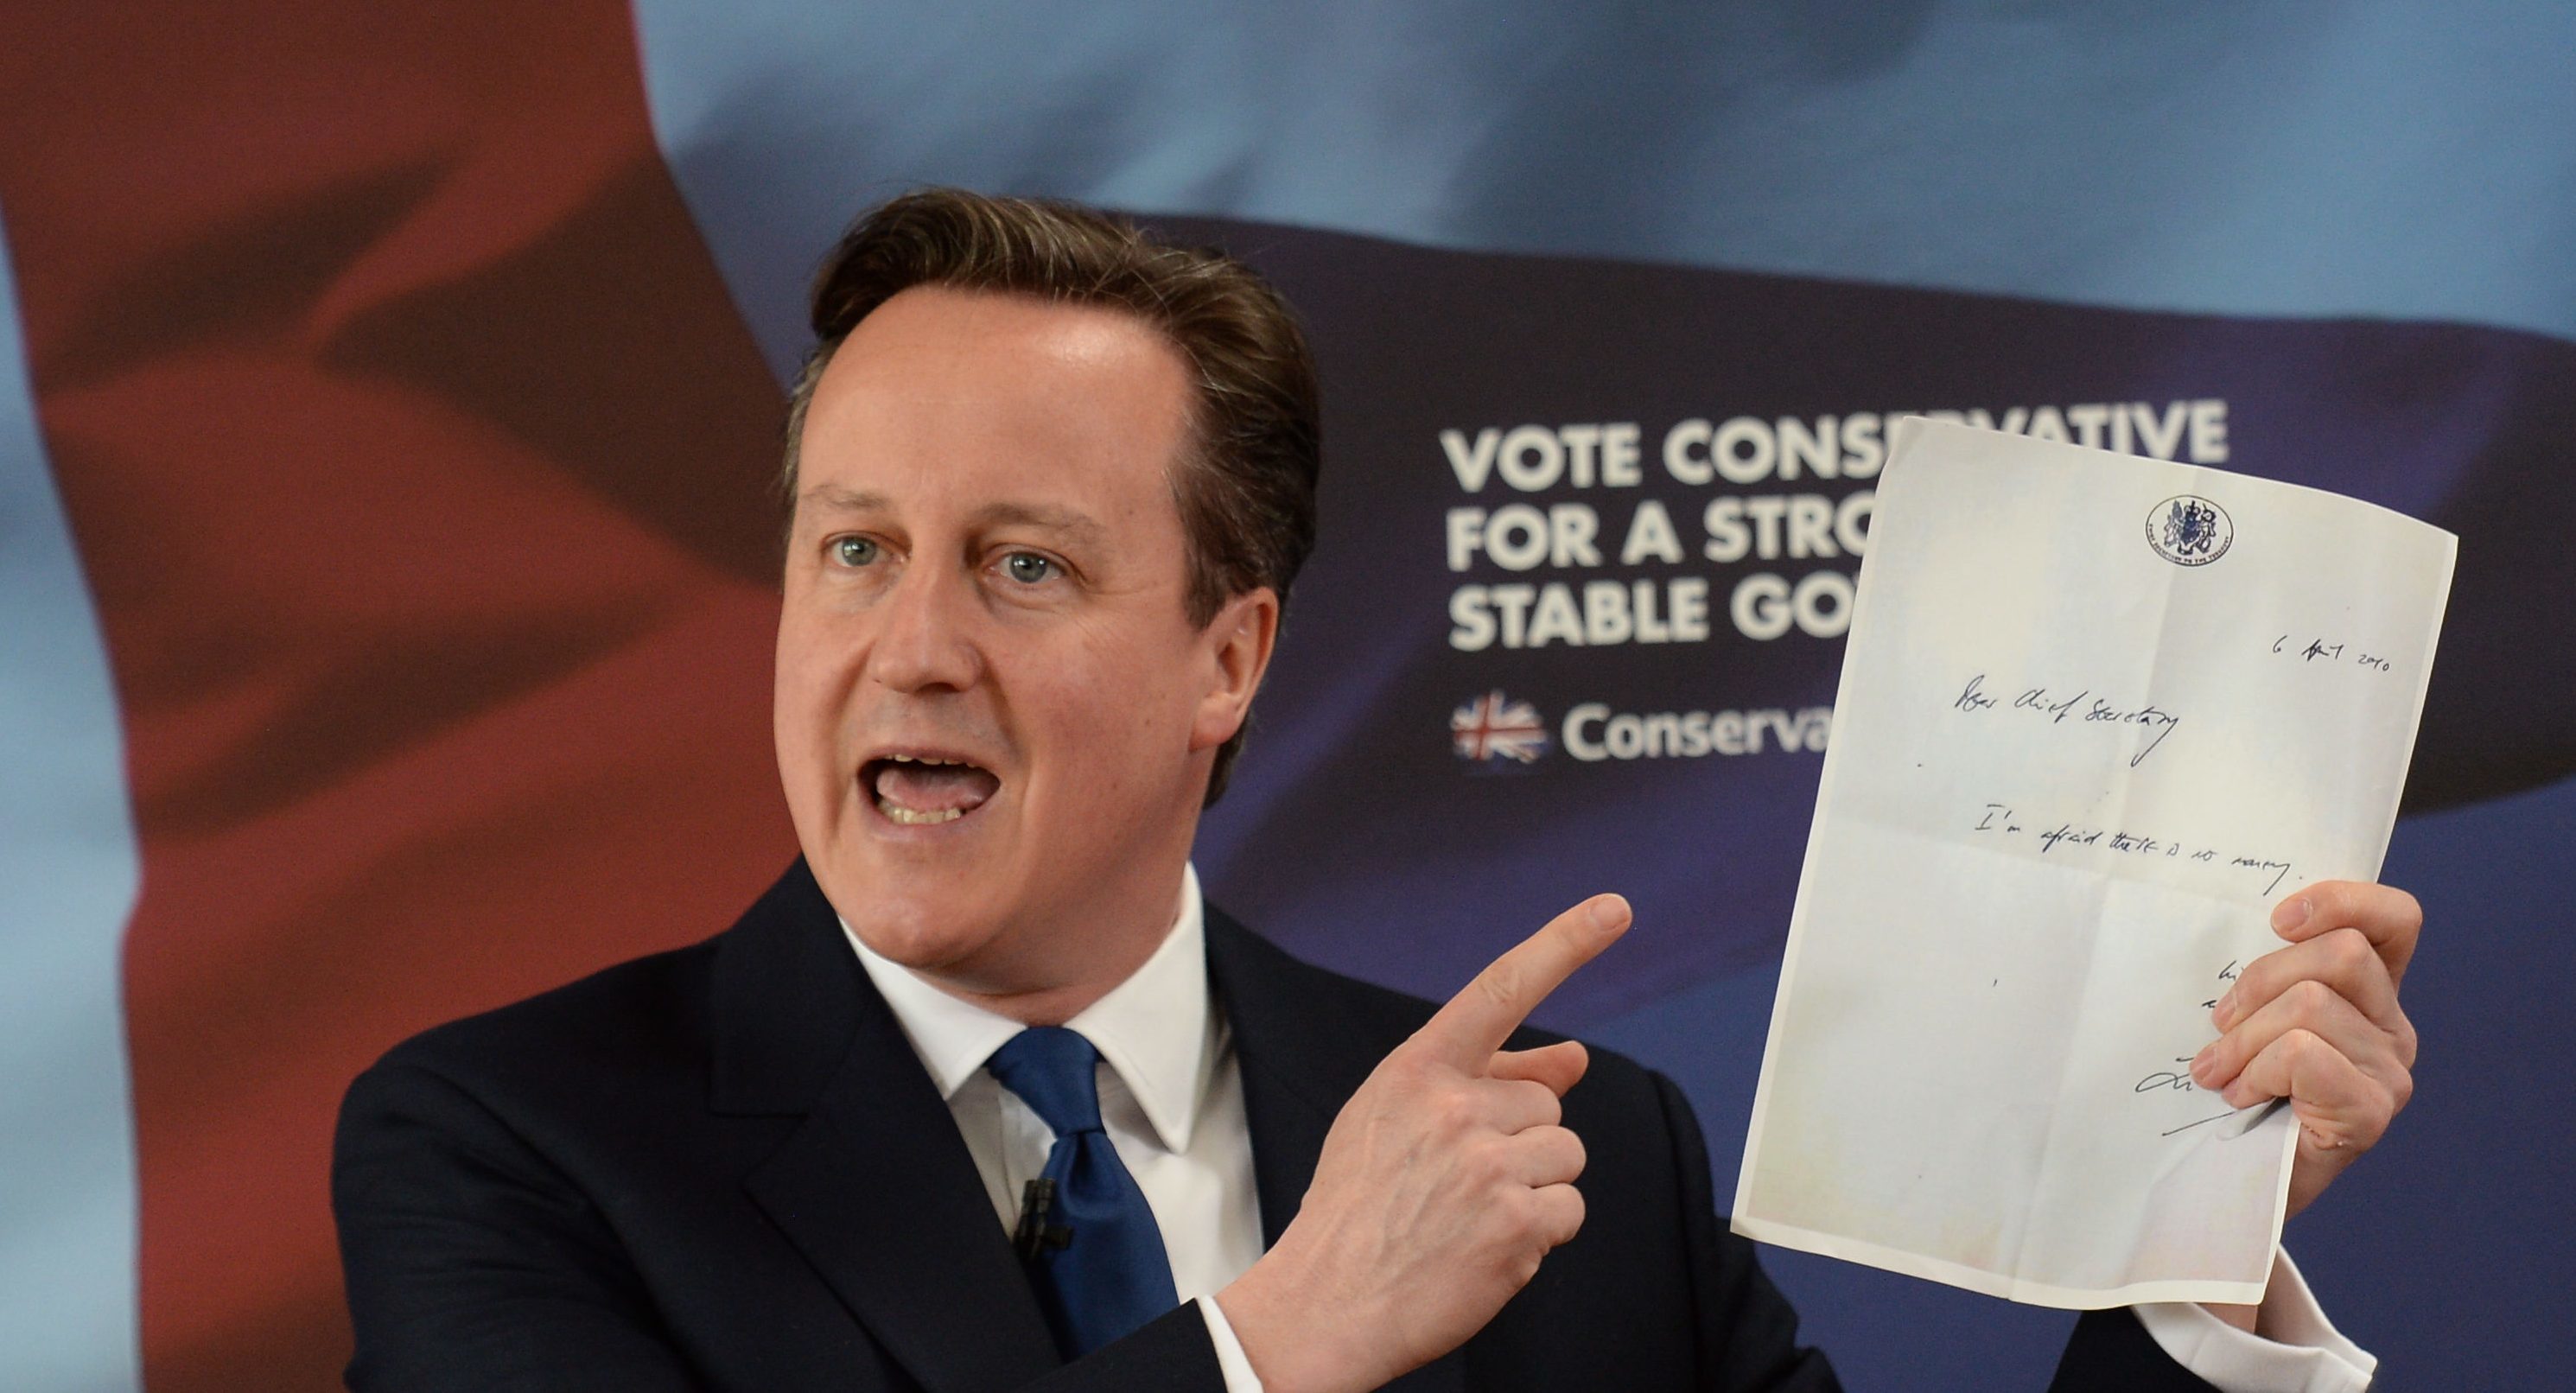 Then-Prime Minister David Cameron holds the notorious "no money" note Liam Byrne left on his Treasury desk after Labour's 2010 election defeat